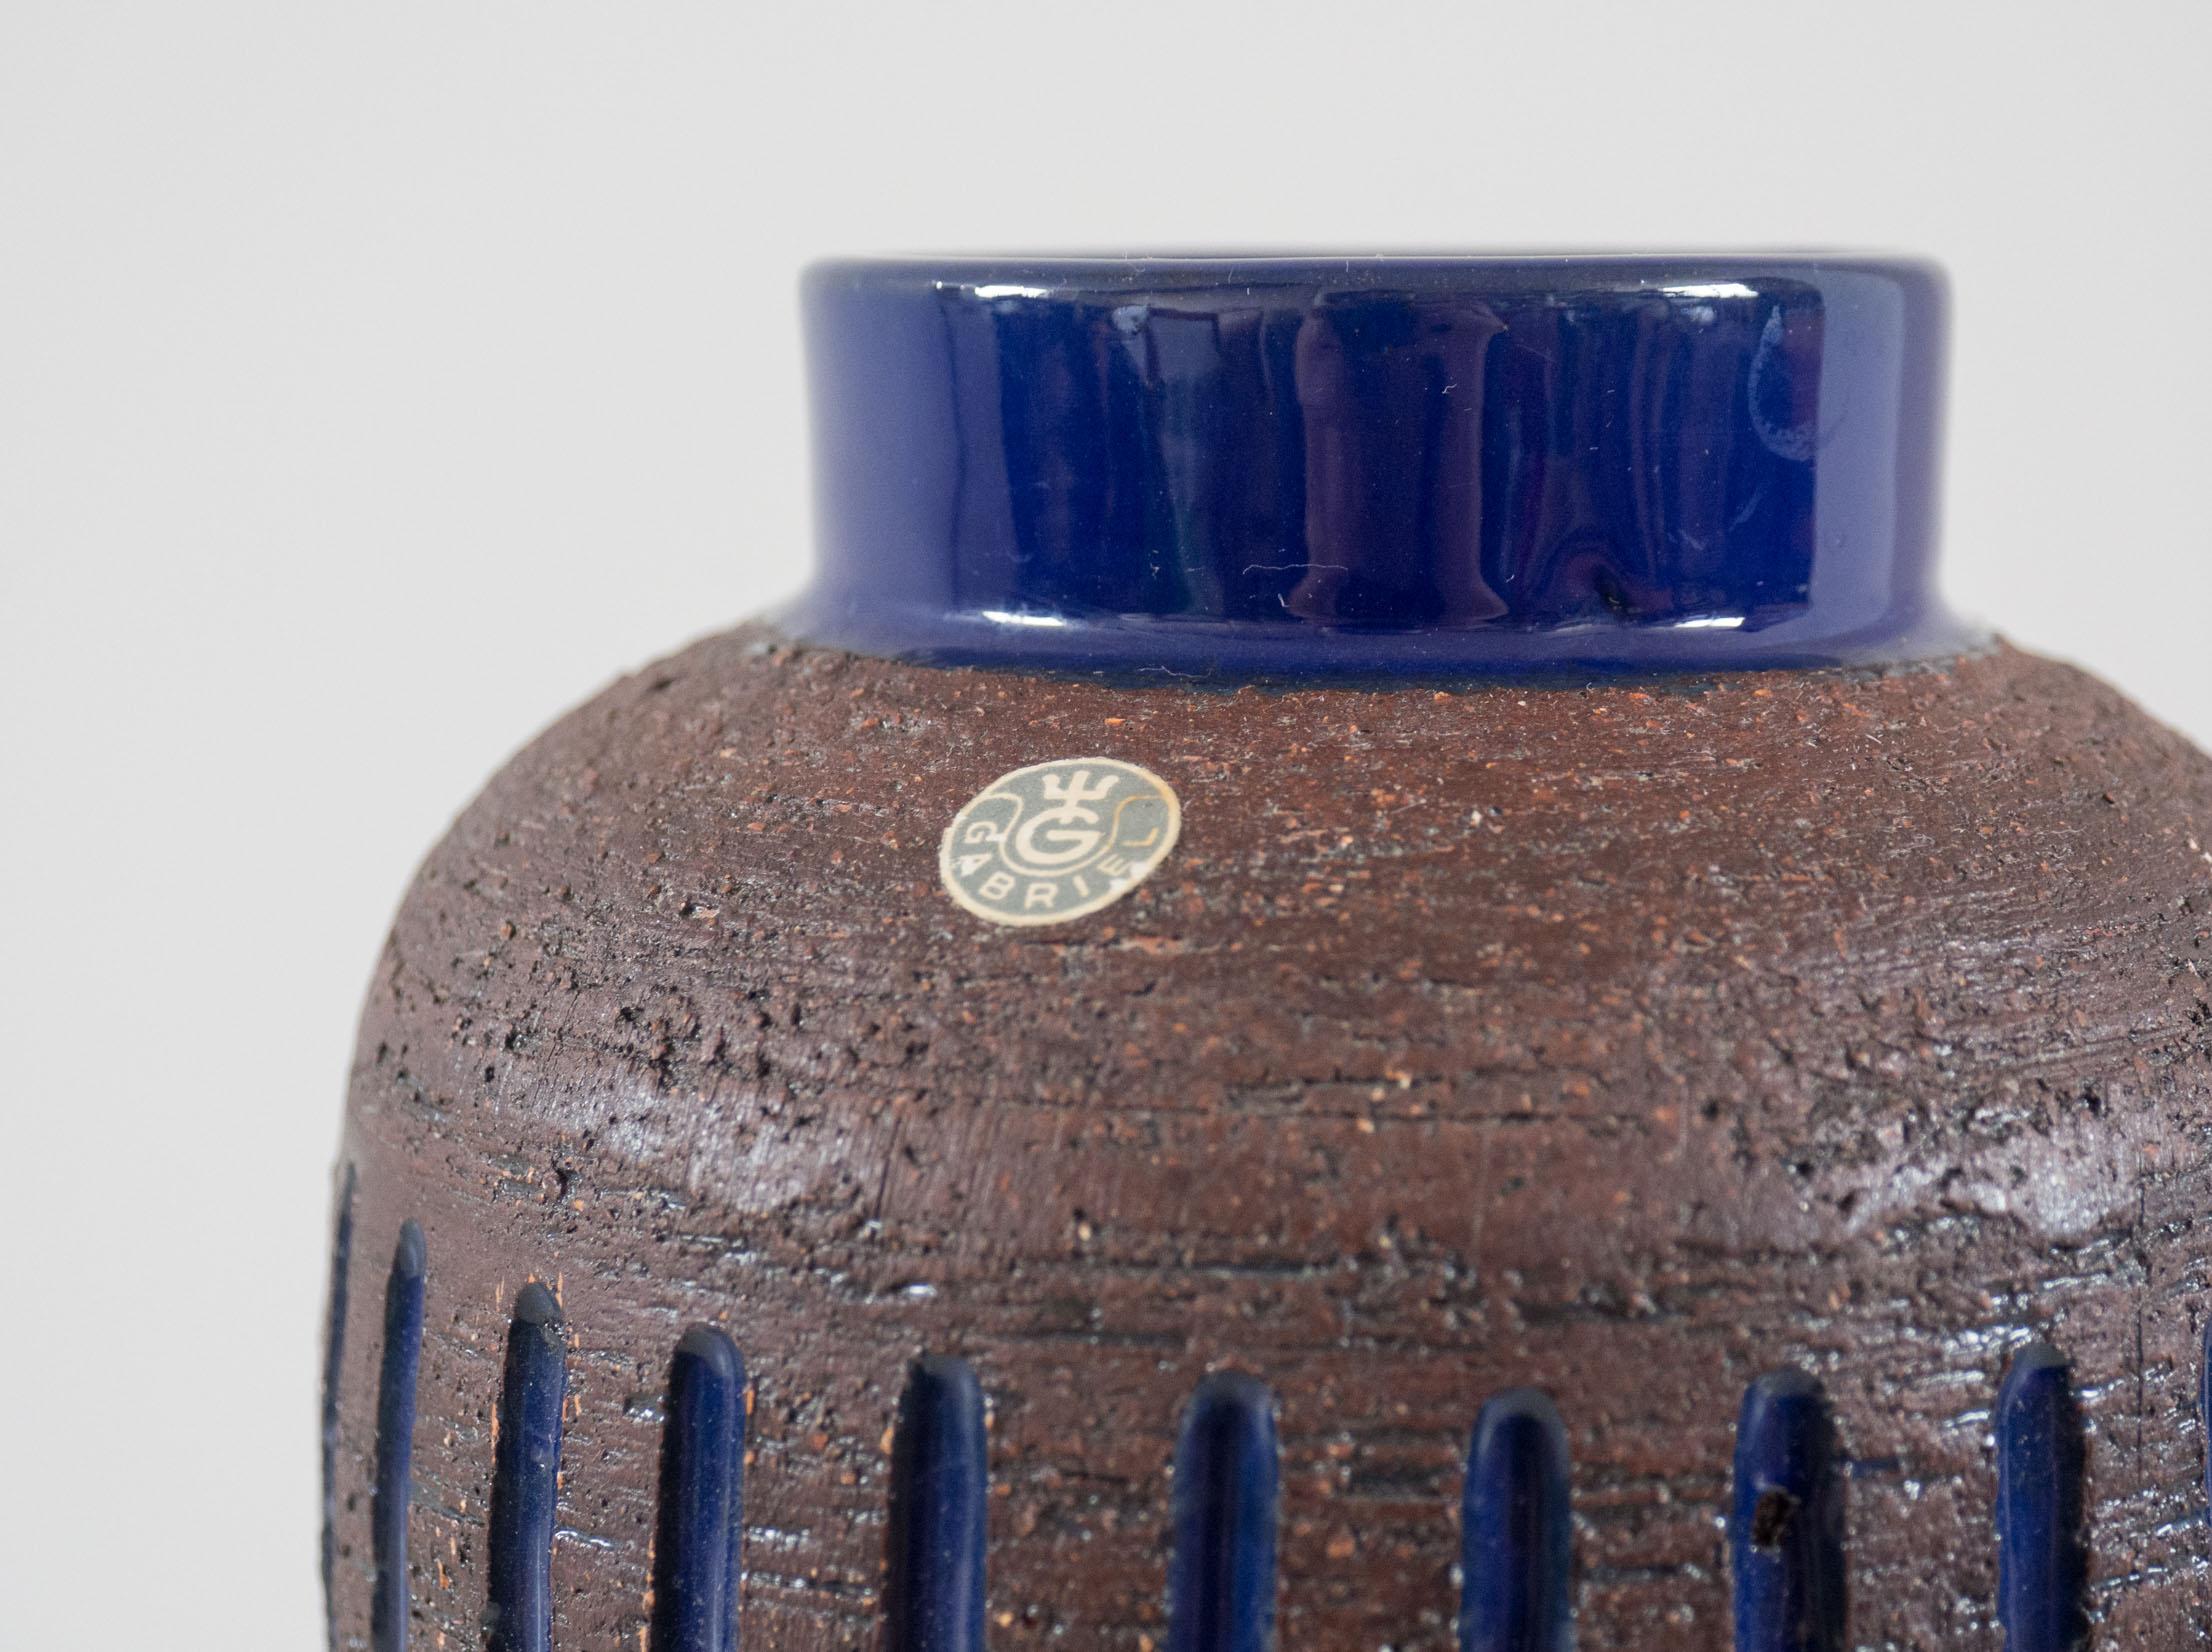 Ceramic vase from Sweden made by Gabriel pottery.

The vase has a bright cobalt blue glazing with brown textured finishing. It’s part of a series of pottery in this specific colour scheme and texture design, with this vase being a central part of